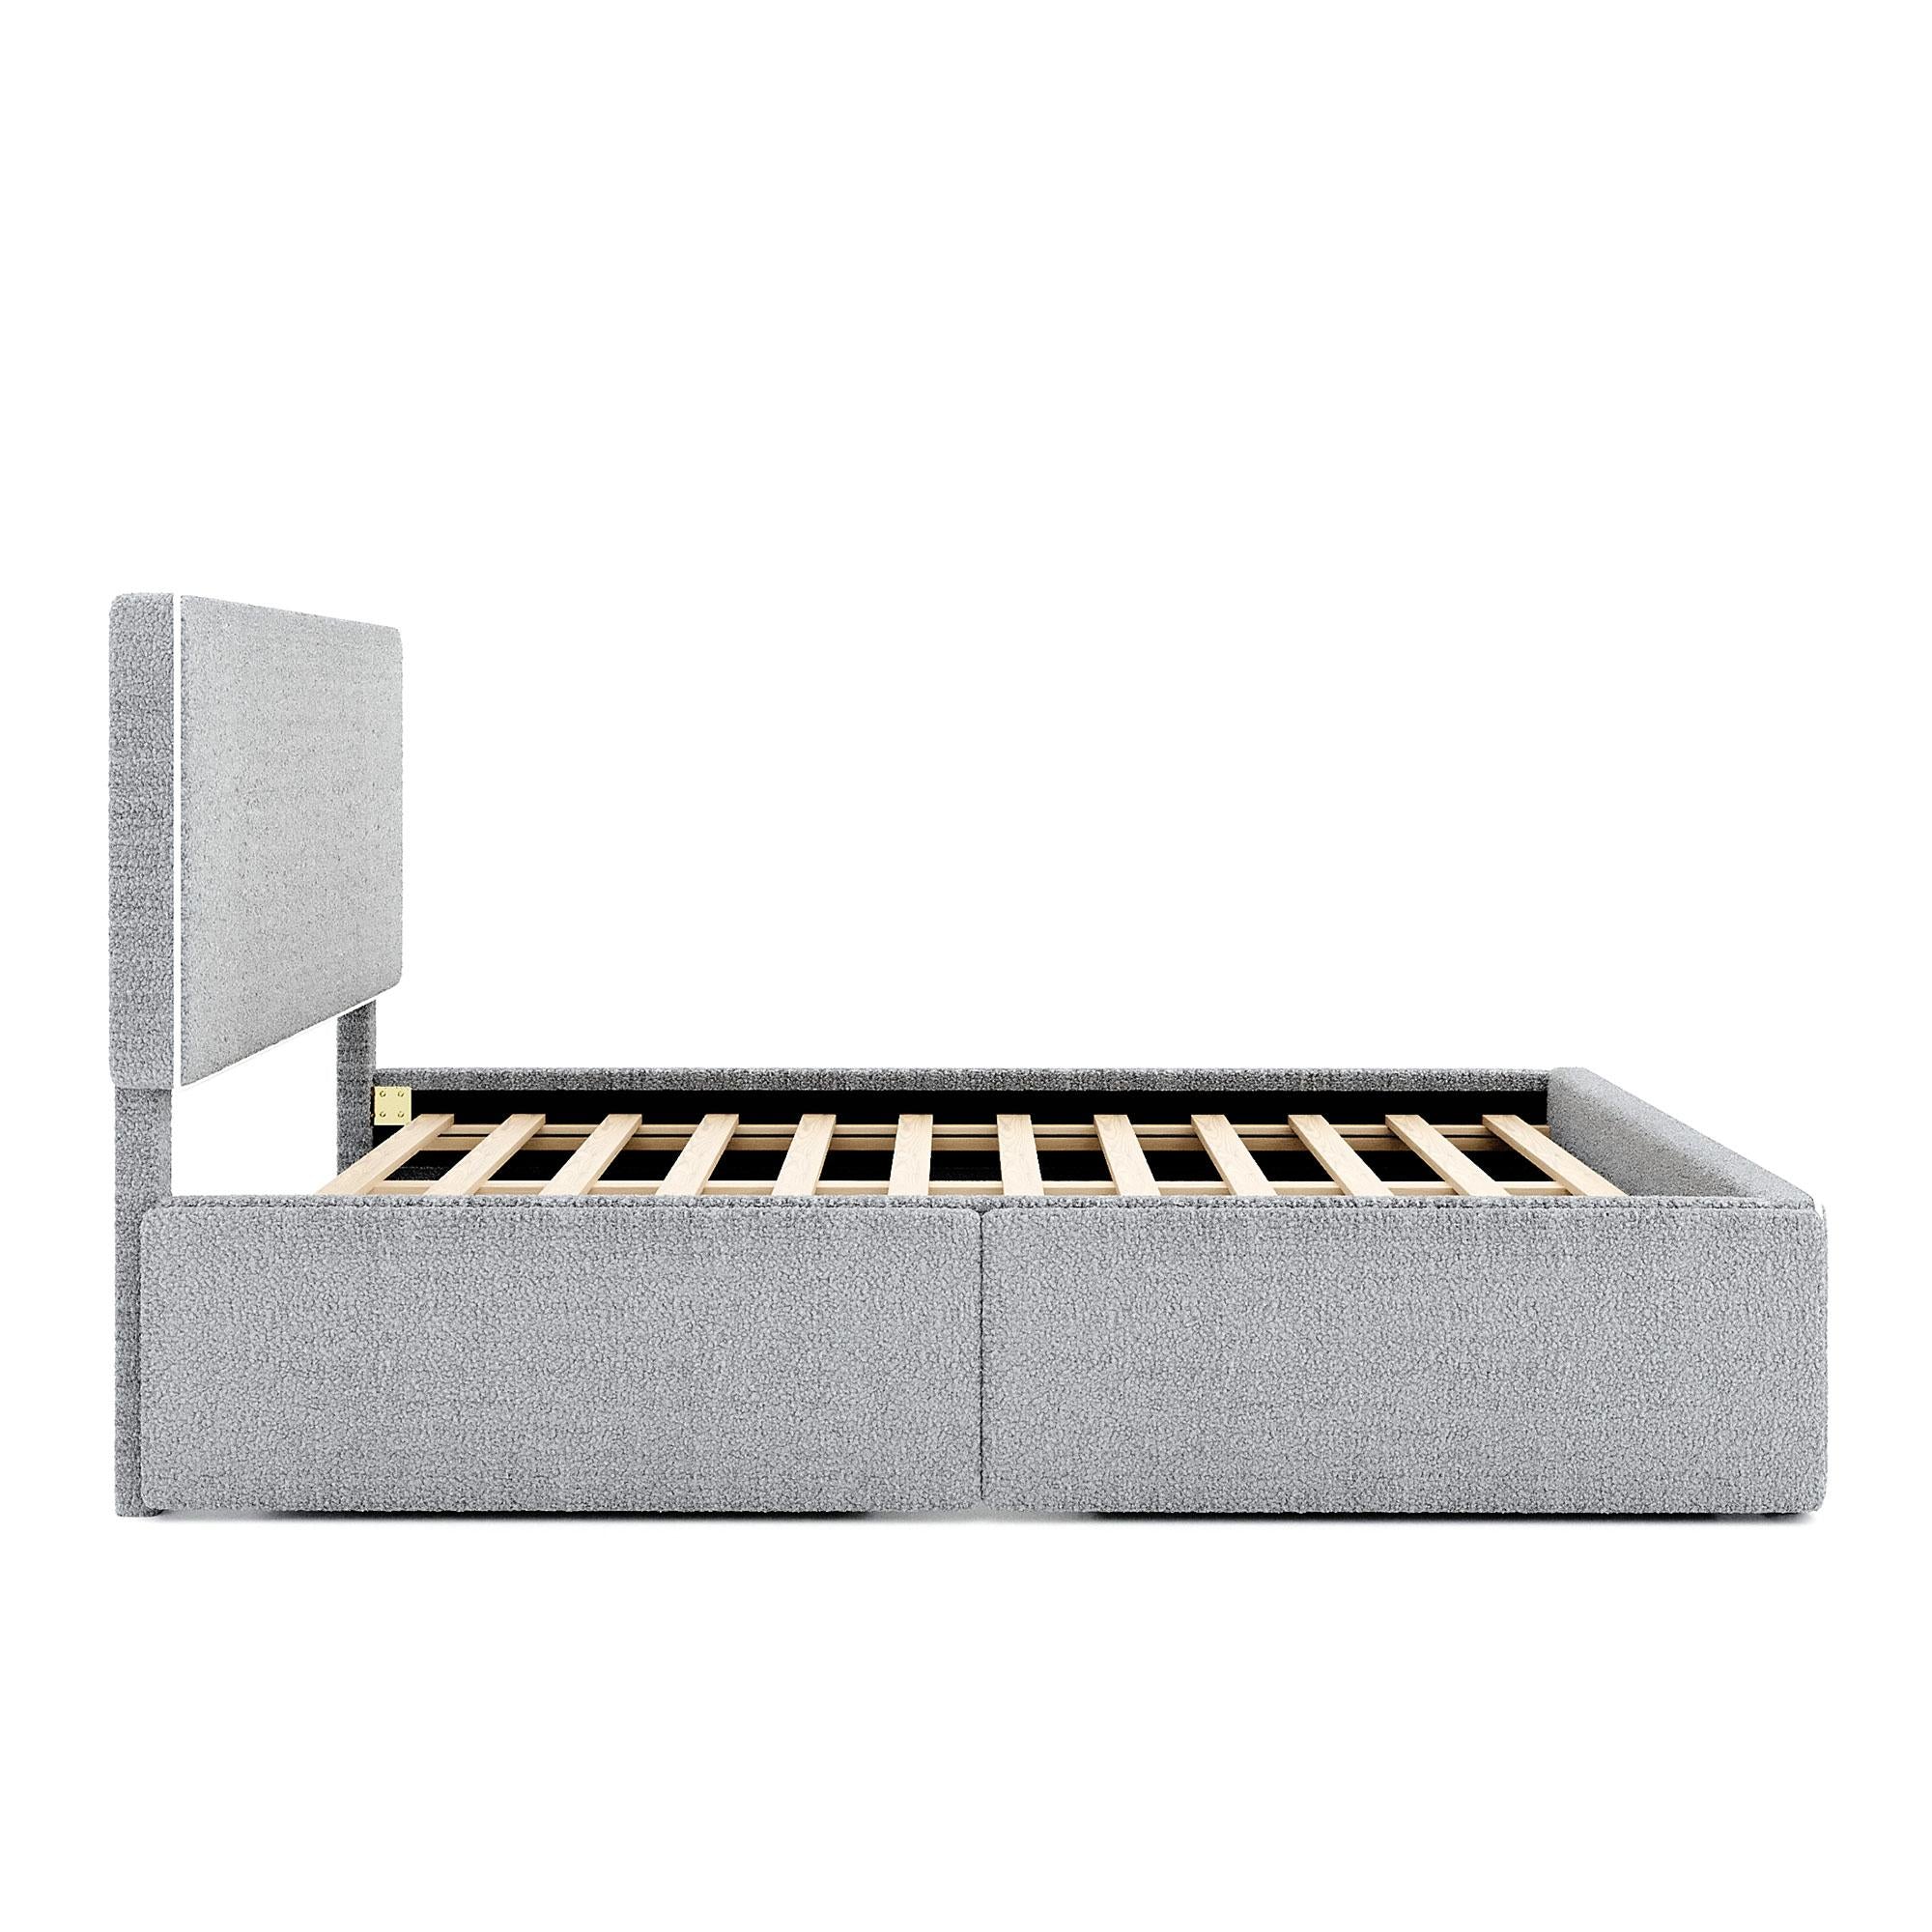 Upholstered Platform Bed with 4 Drawers and White Edge on the Headboard & Footboard, Gray